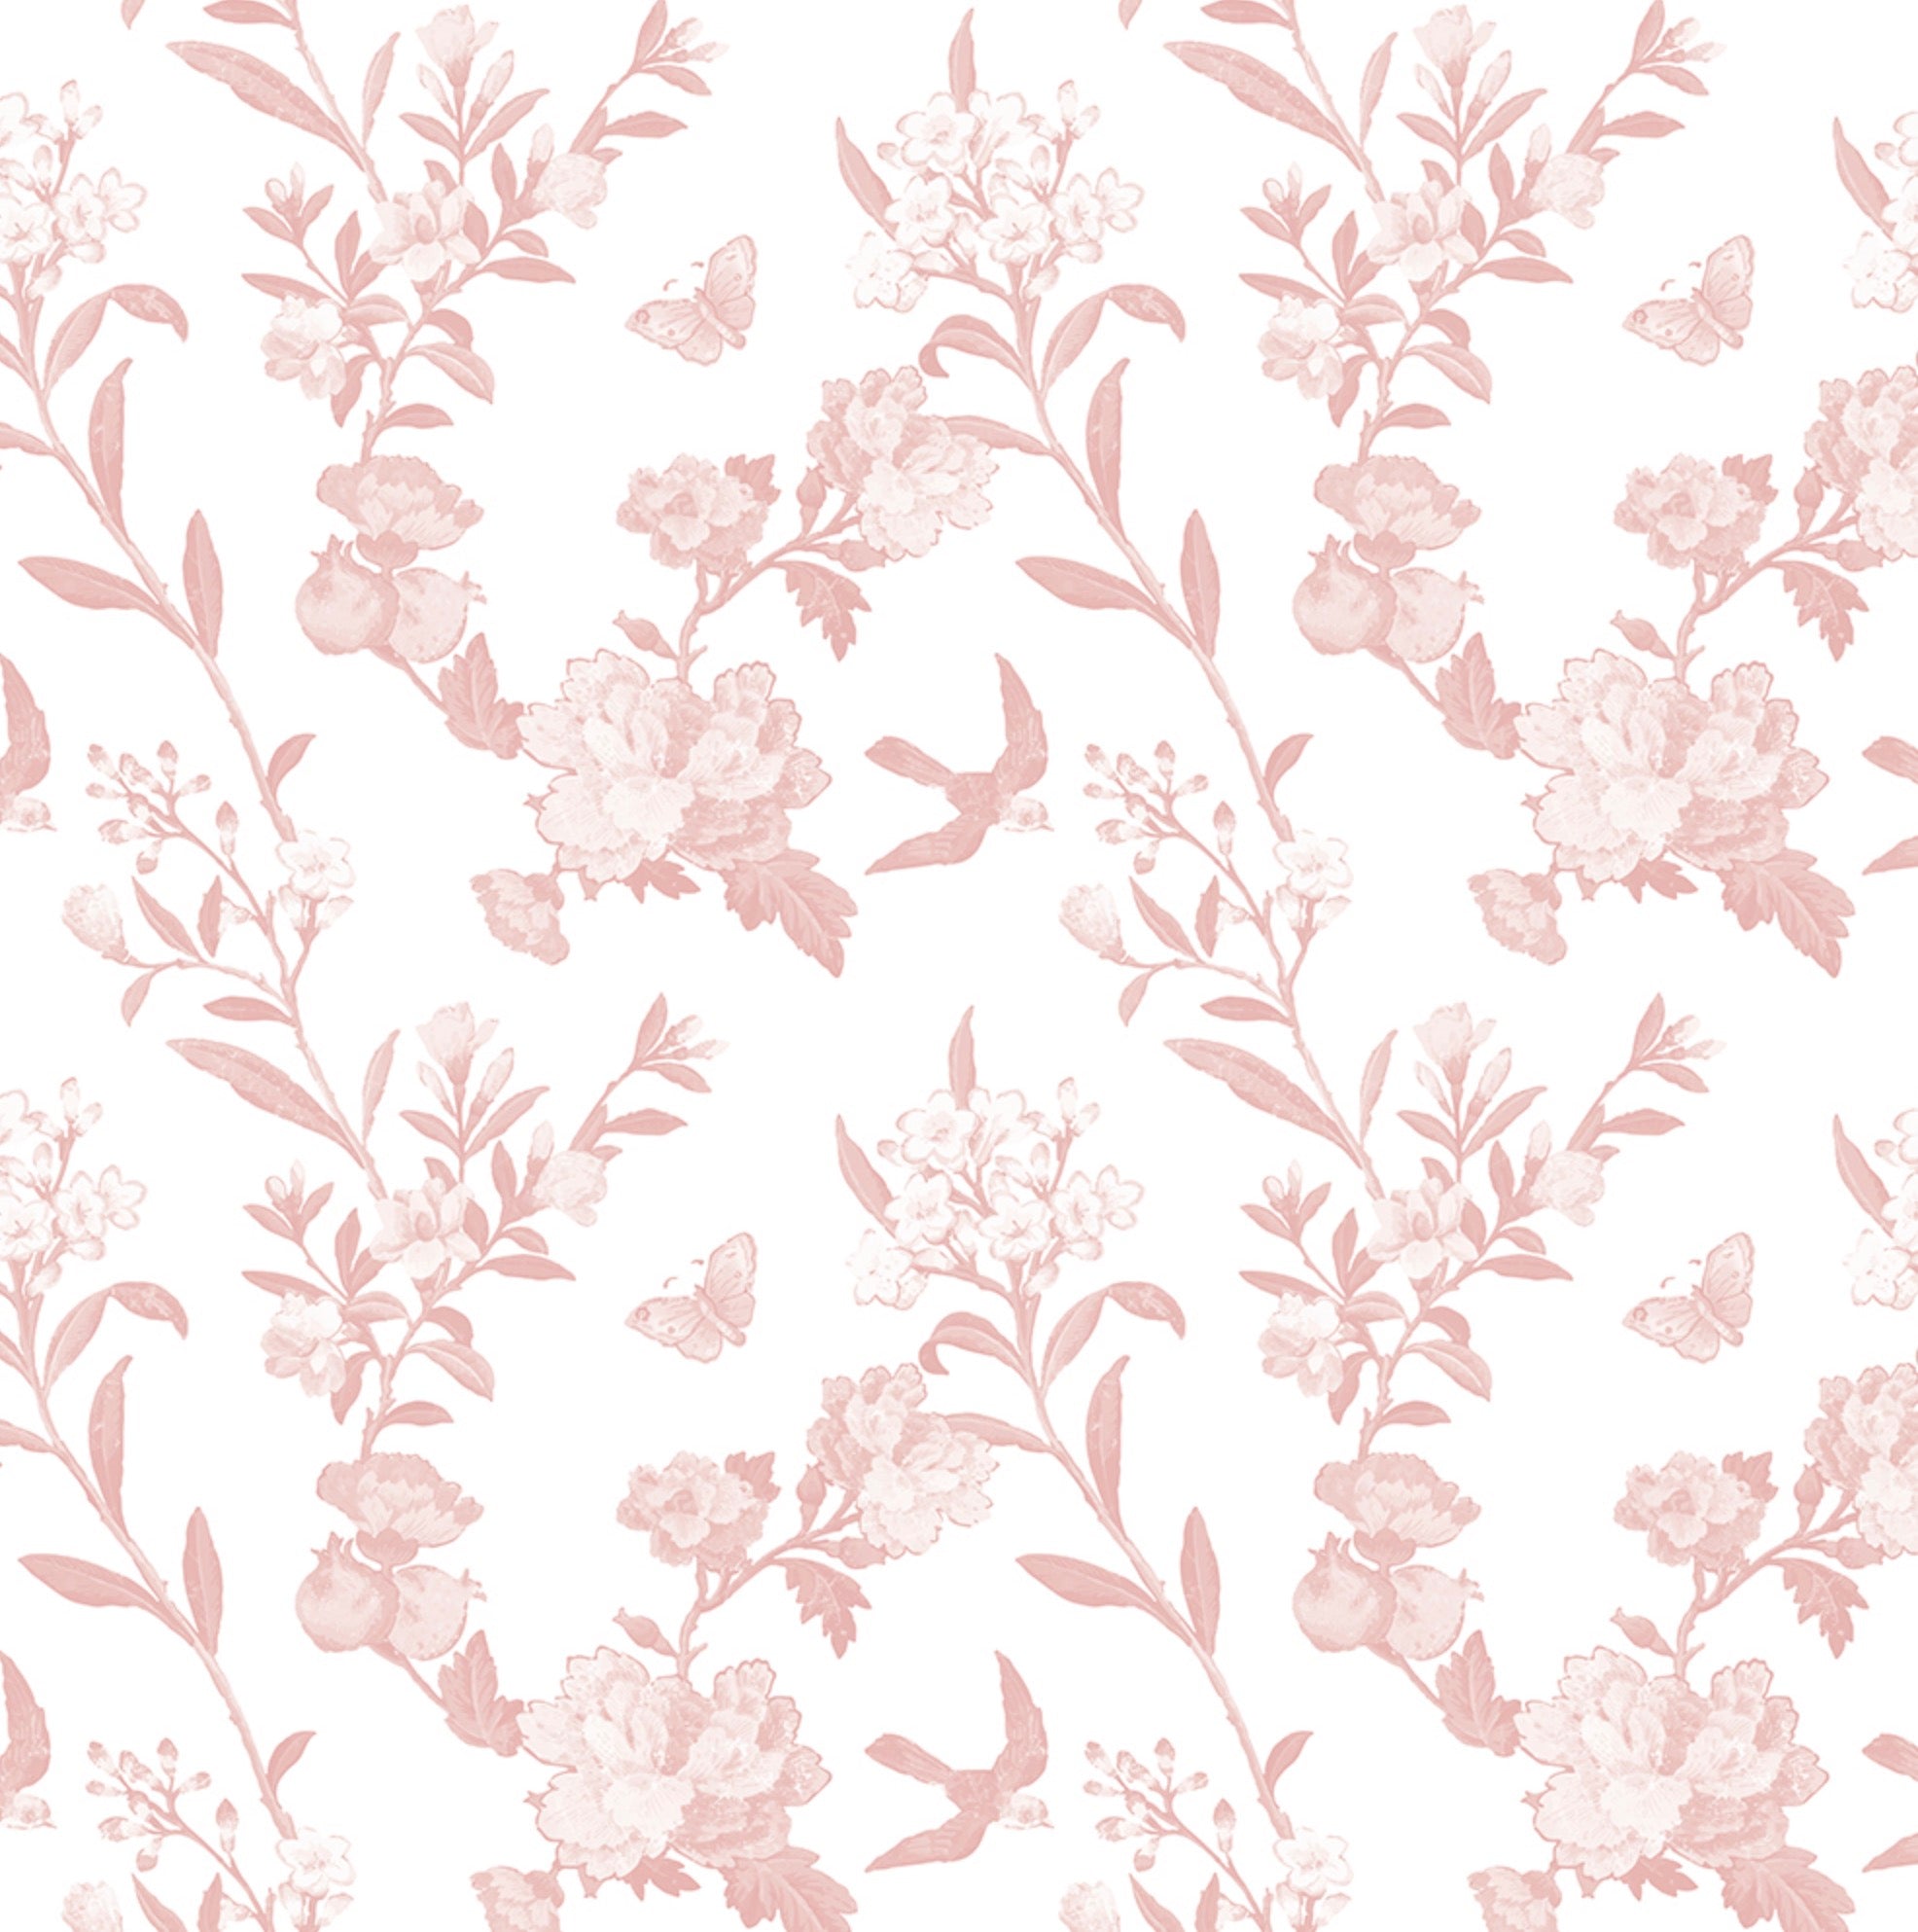 Showerwall Acrylic Prints & Images Collection  - Vintage China Blush